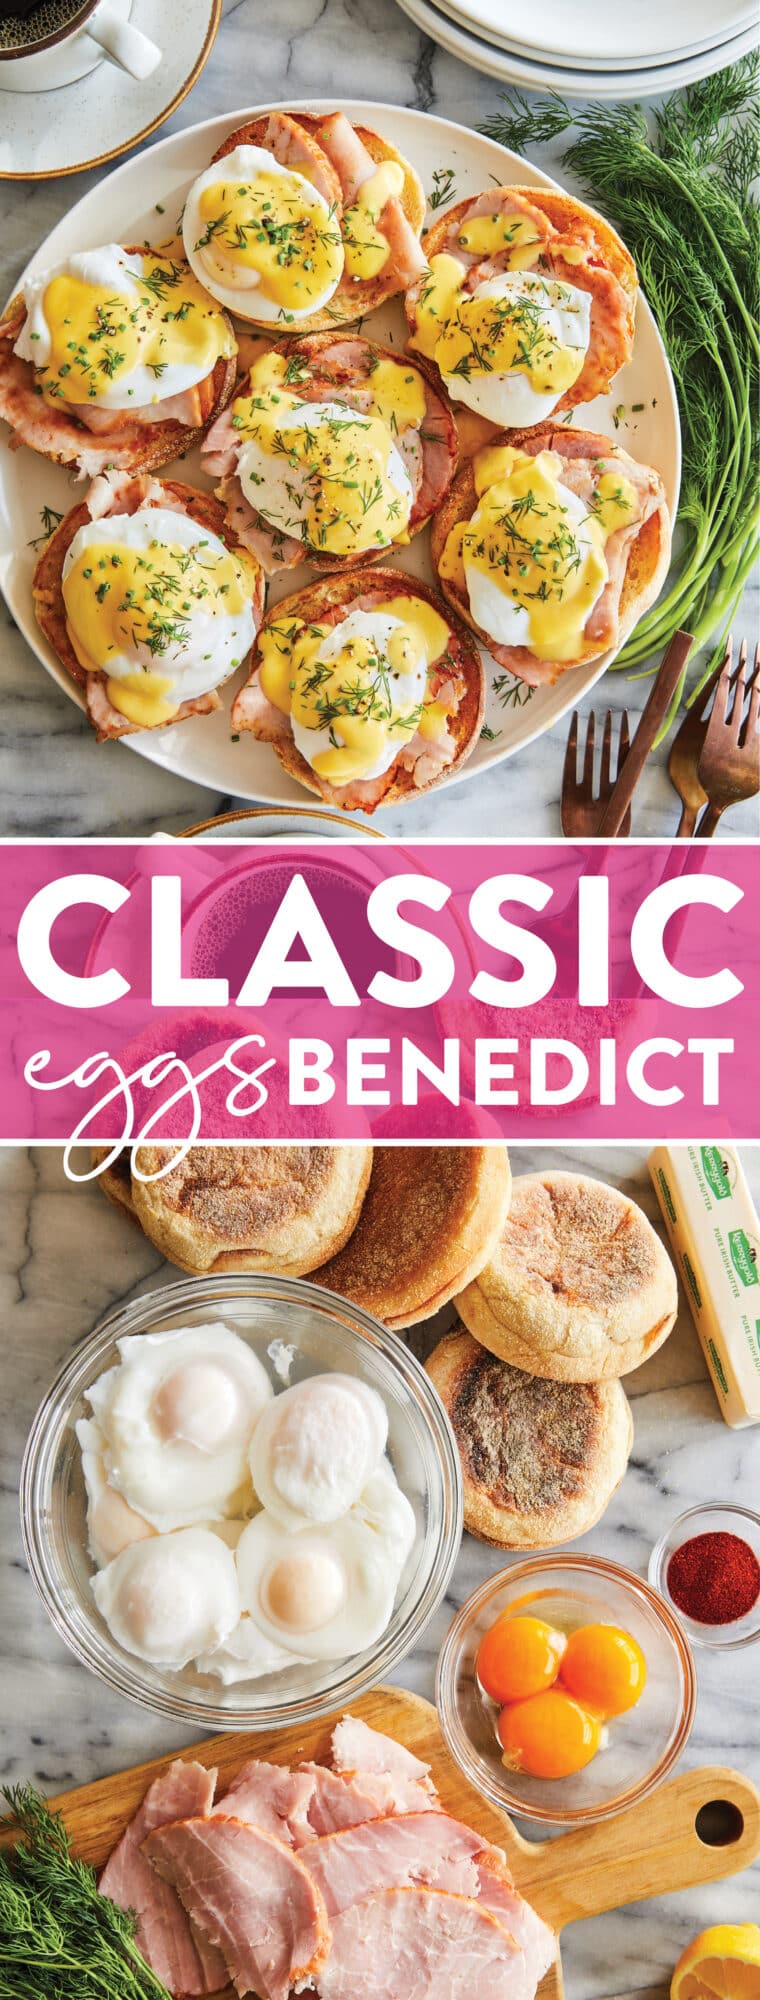 Classic Eggs Benedict - Truly the BEST eggs benedict recipe you can make right at home! Made with the creamiest benedict (hollandaise) sauce.